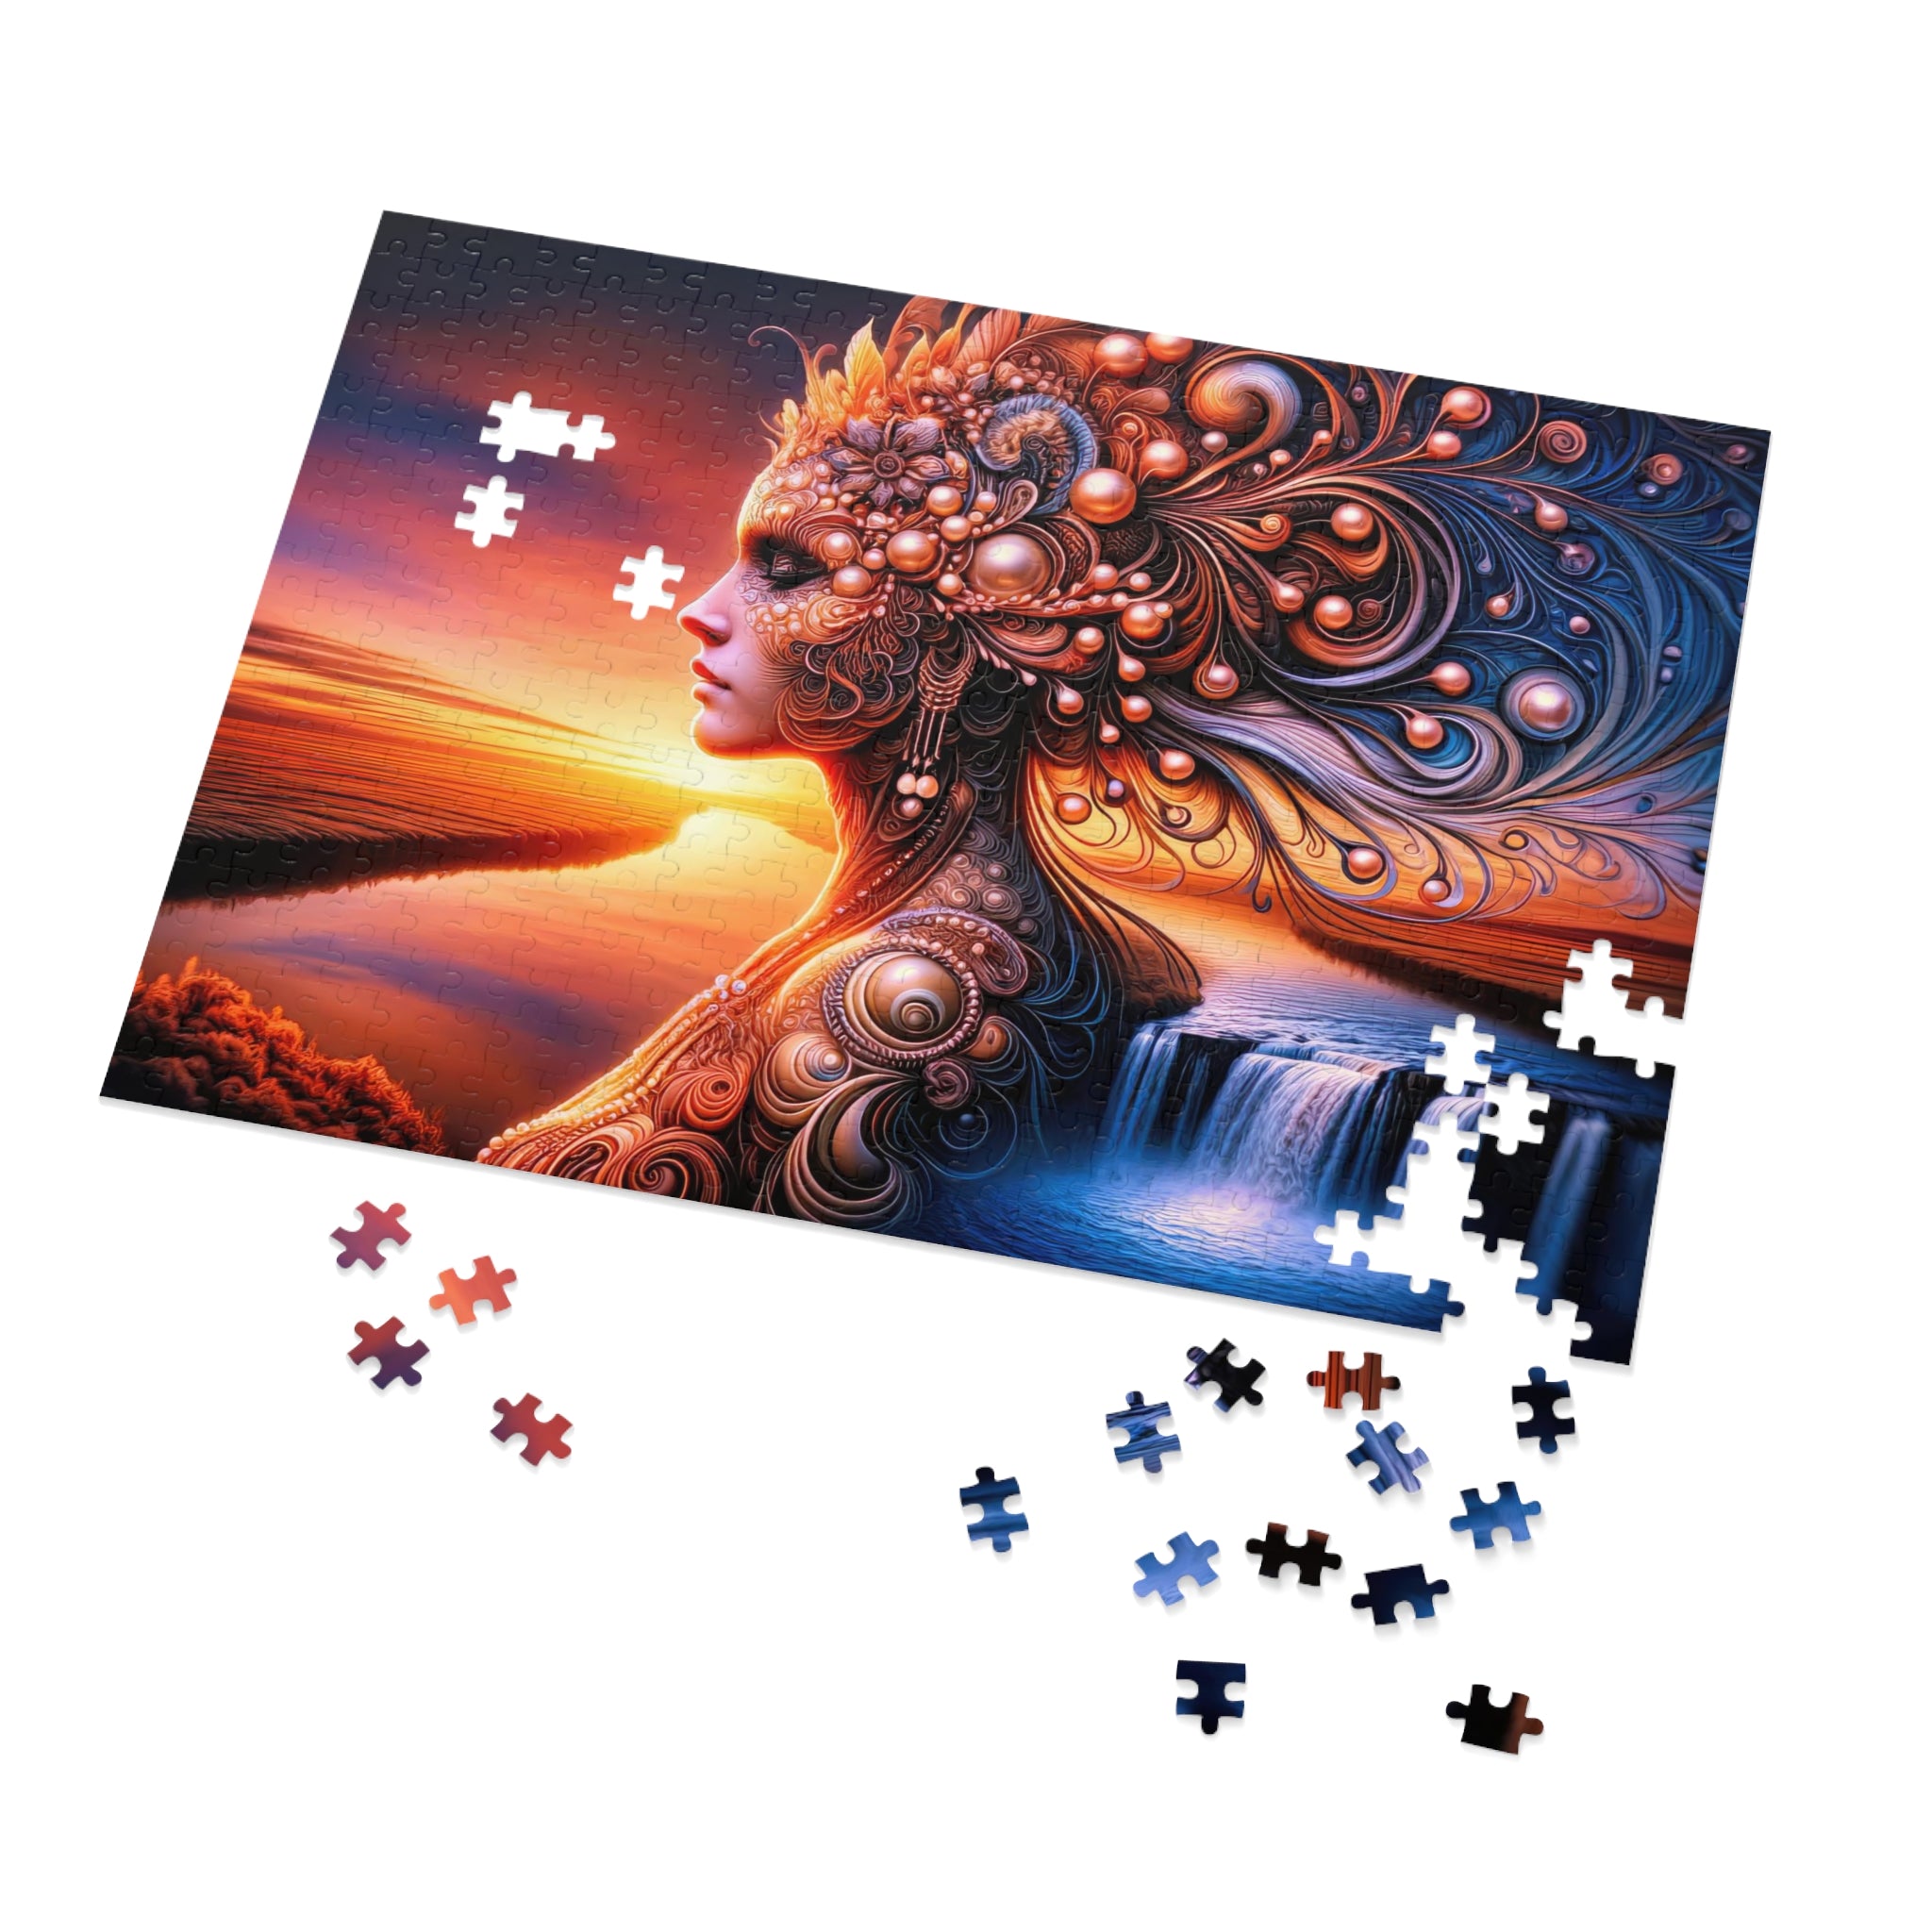 Pearlescent Dreams at Dusk Puzzle